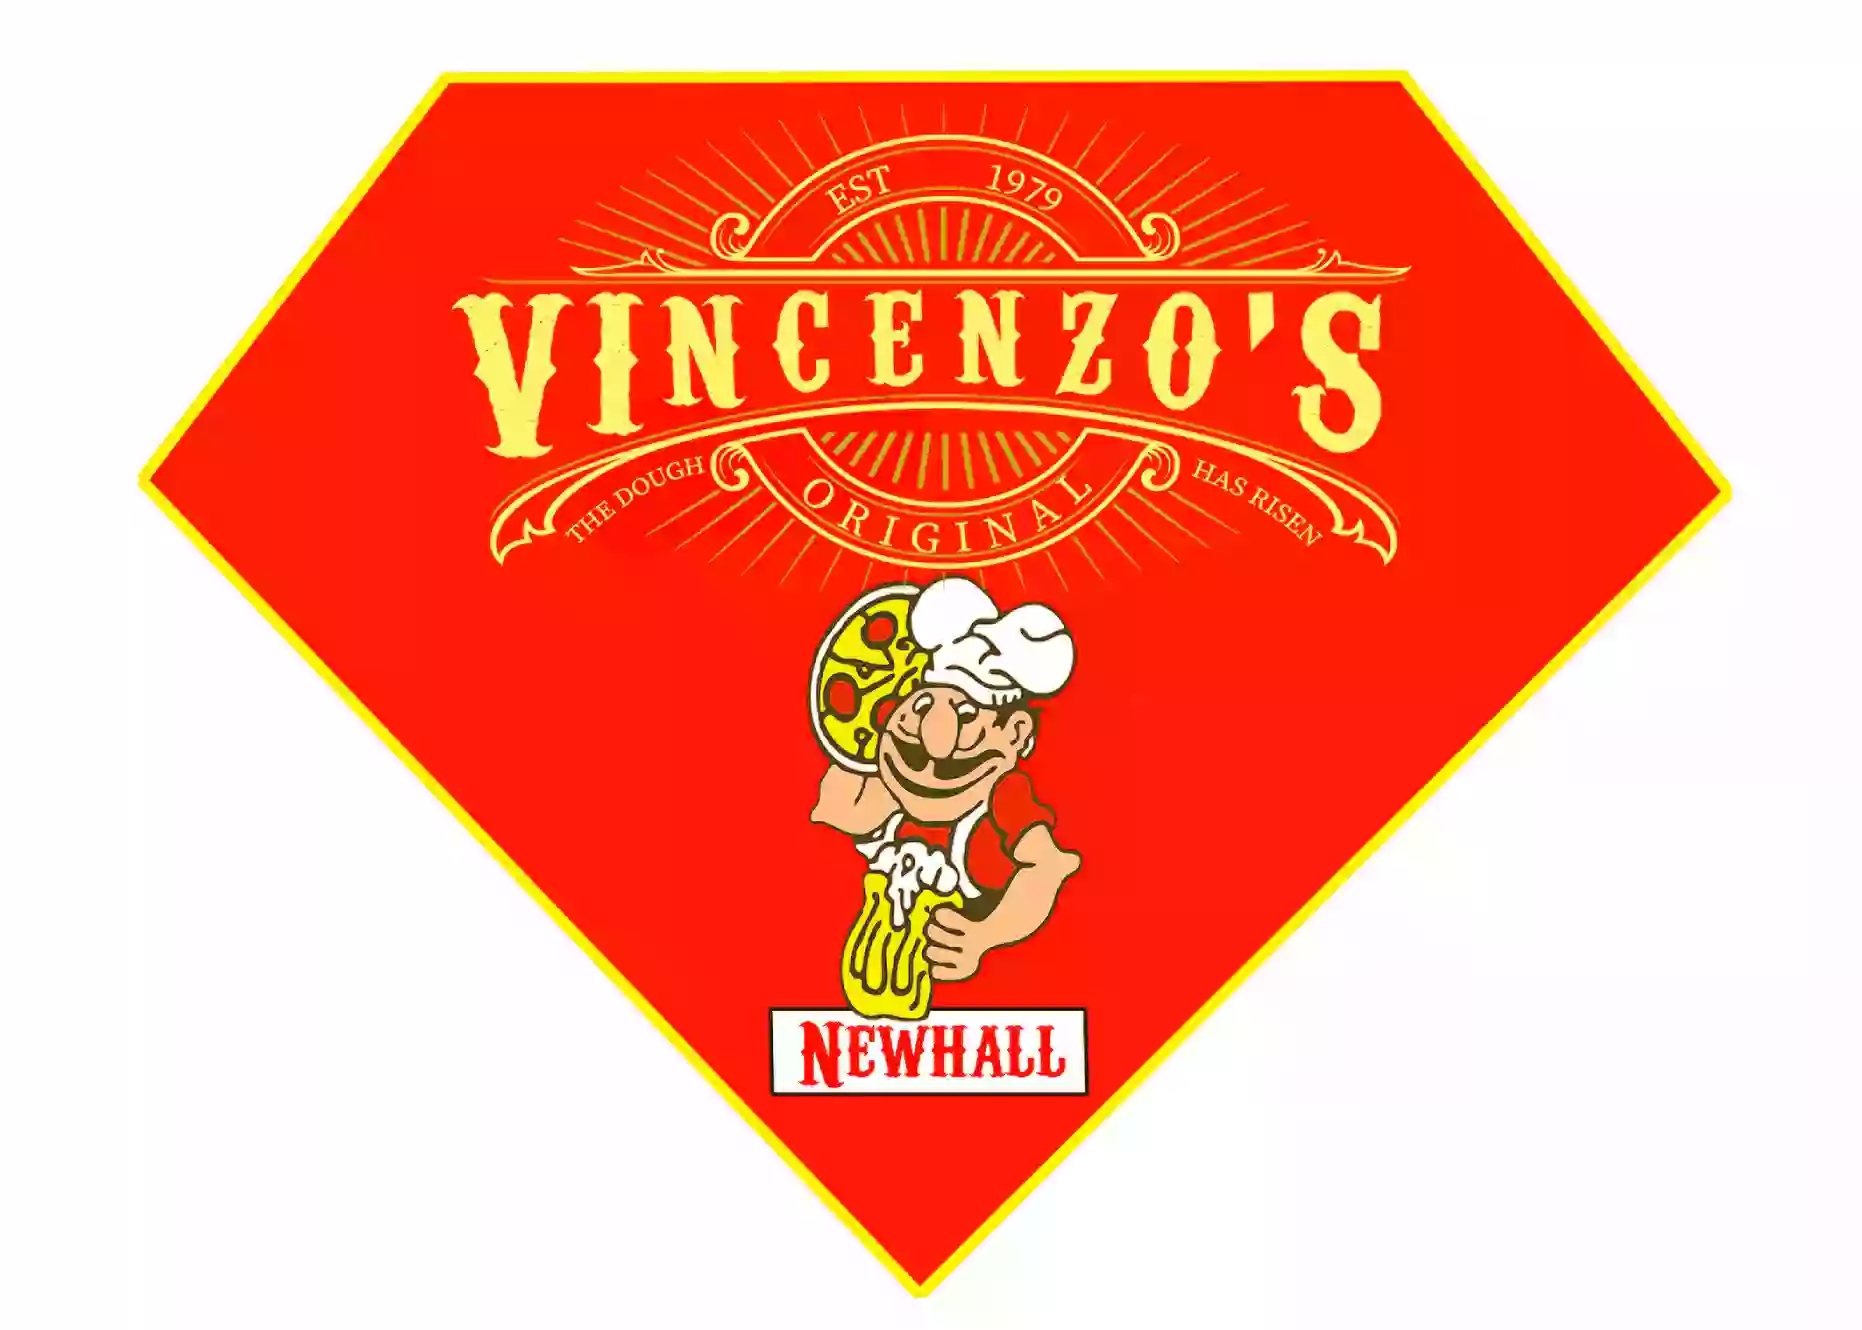 Vincenzo's Pizza Newhall